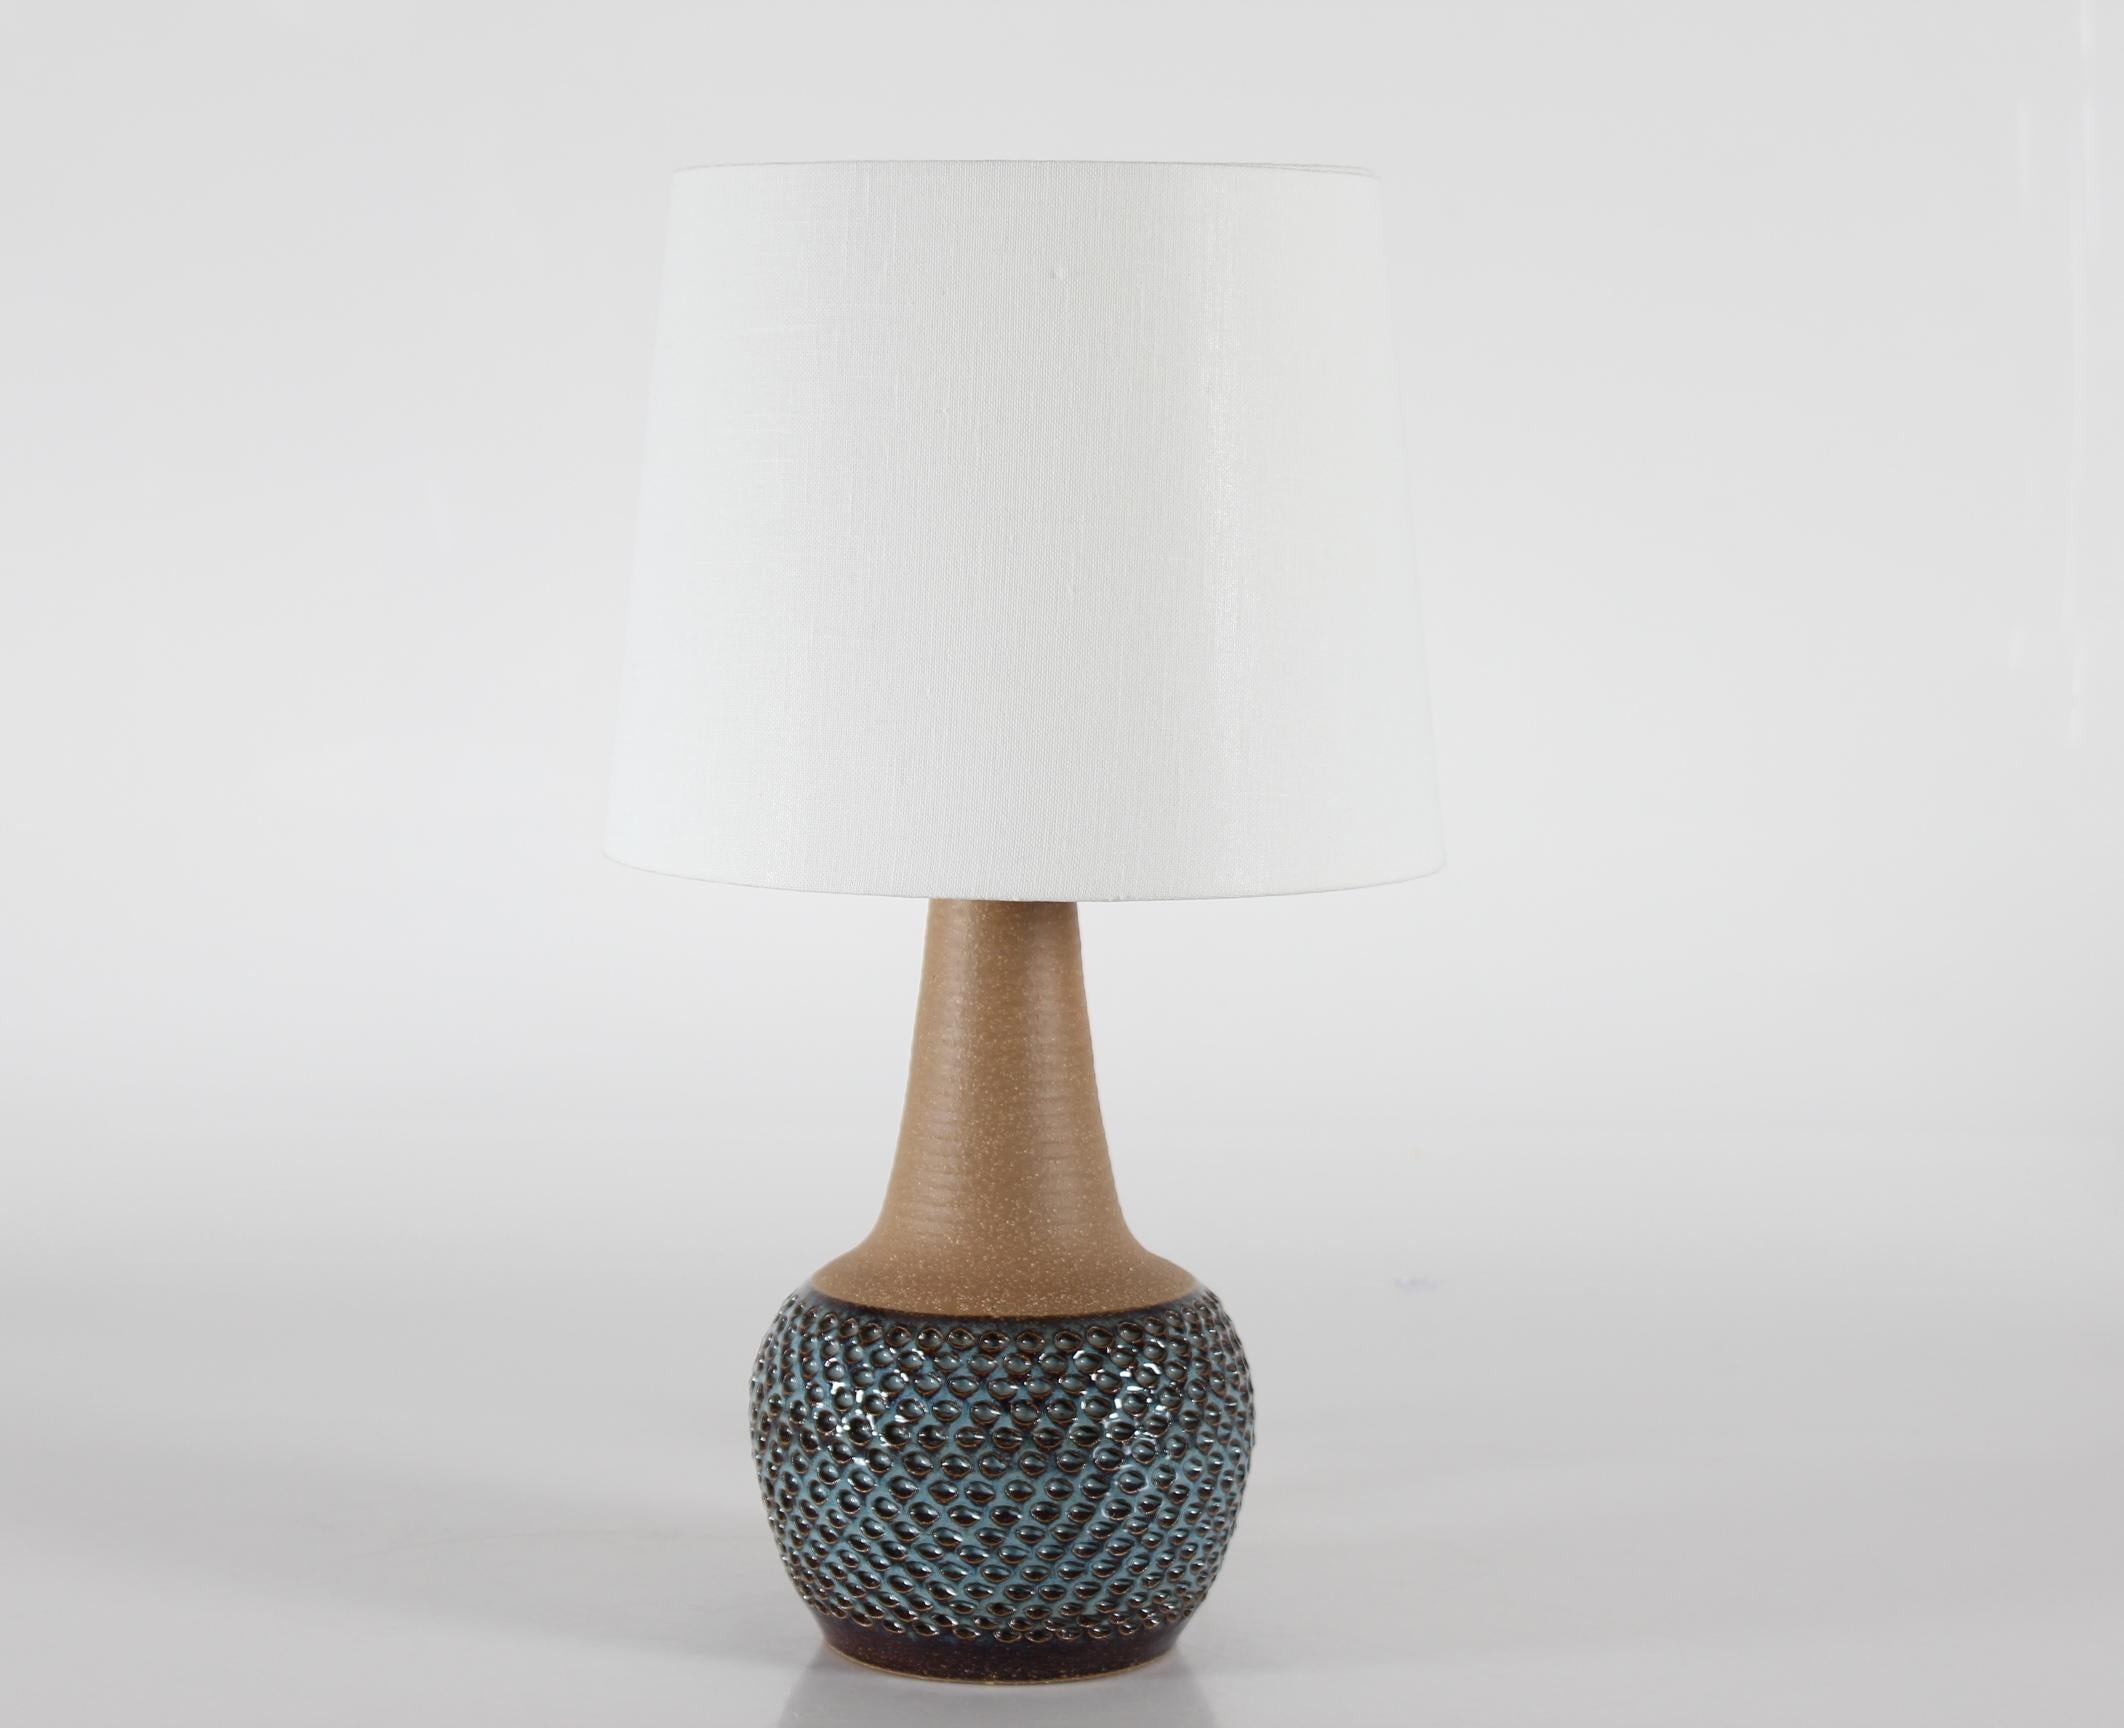 Mid-century tall budded table lamp model no. 3055 designed by Einar Johansen for Danish stoneware manufacturer Søholm. Produced, circa 1960s.

The lamp has been left unglazed on the neck and shoulder which is contrasted by a textured surface and